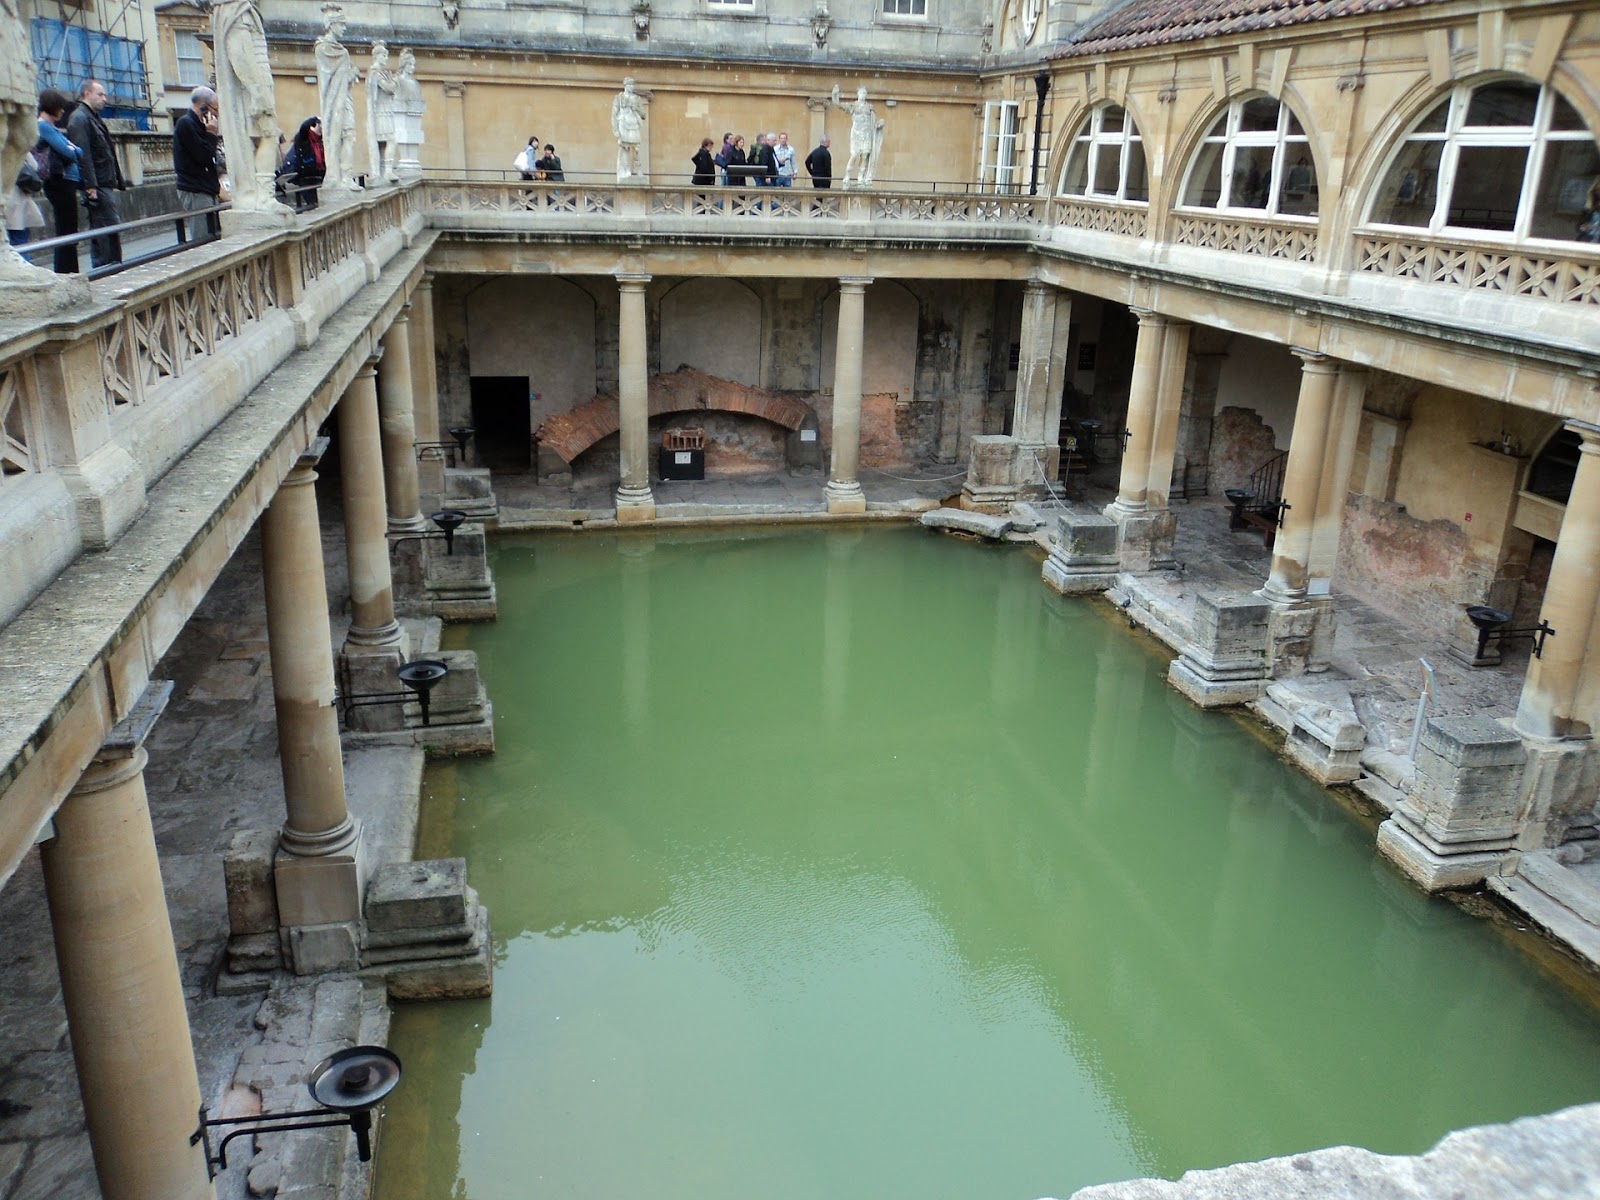 traditional roman baths in bath, united kingdom. the bath is observed by tourists from the balcony one level above. tourist attraction in united kingdom, must-see on a UK road trip